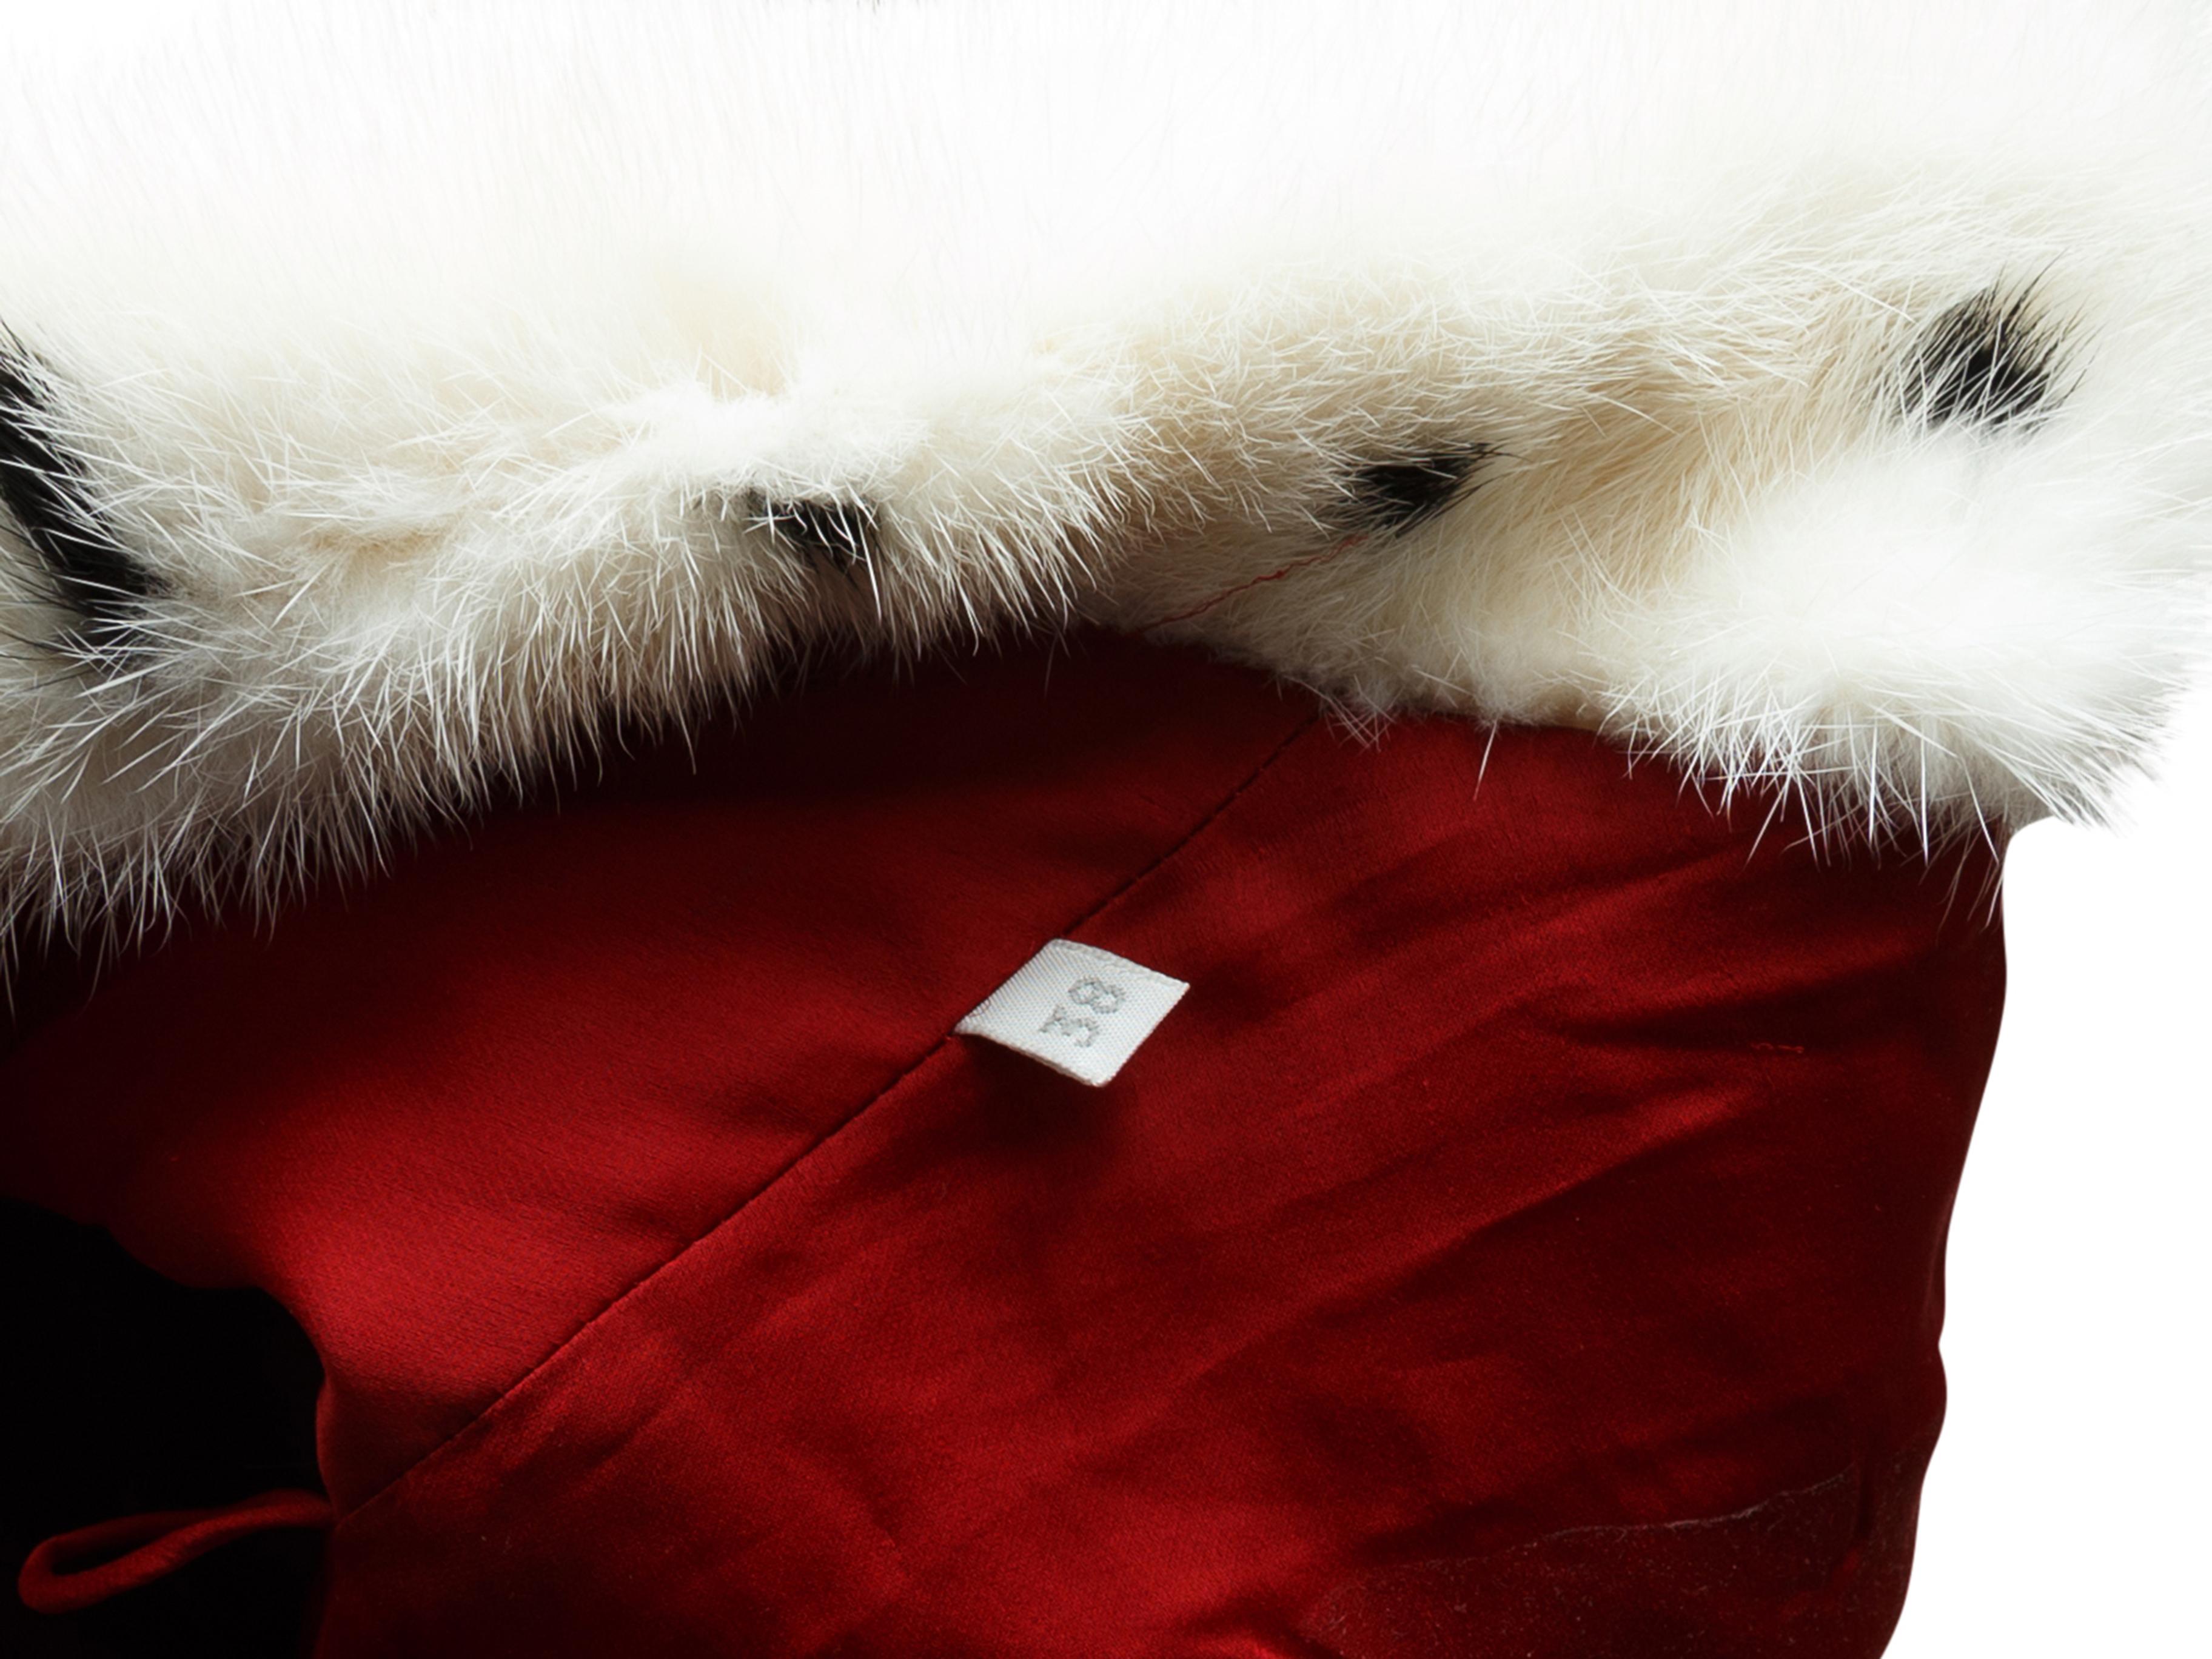 Product details: Red, black and white long mink fur coat by Valentino. Pointed collar. Closures at center front. 34